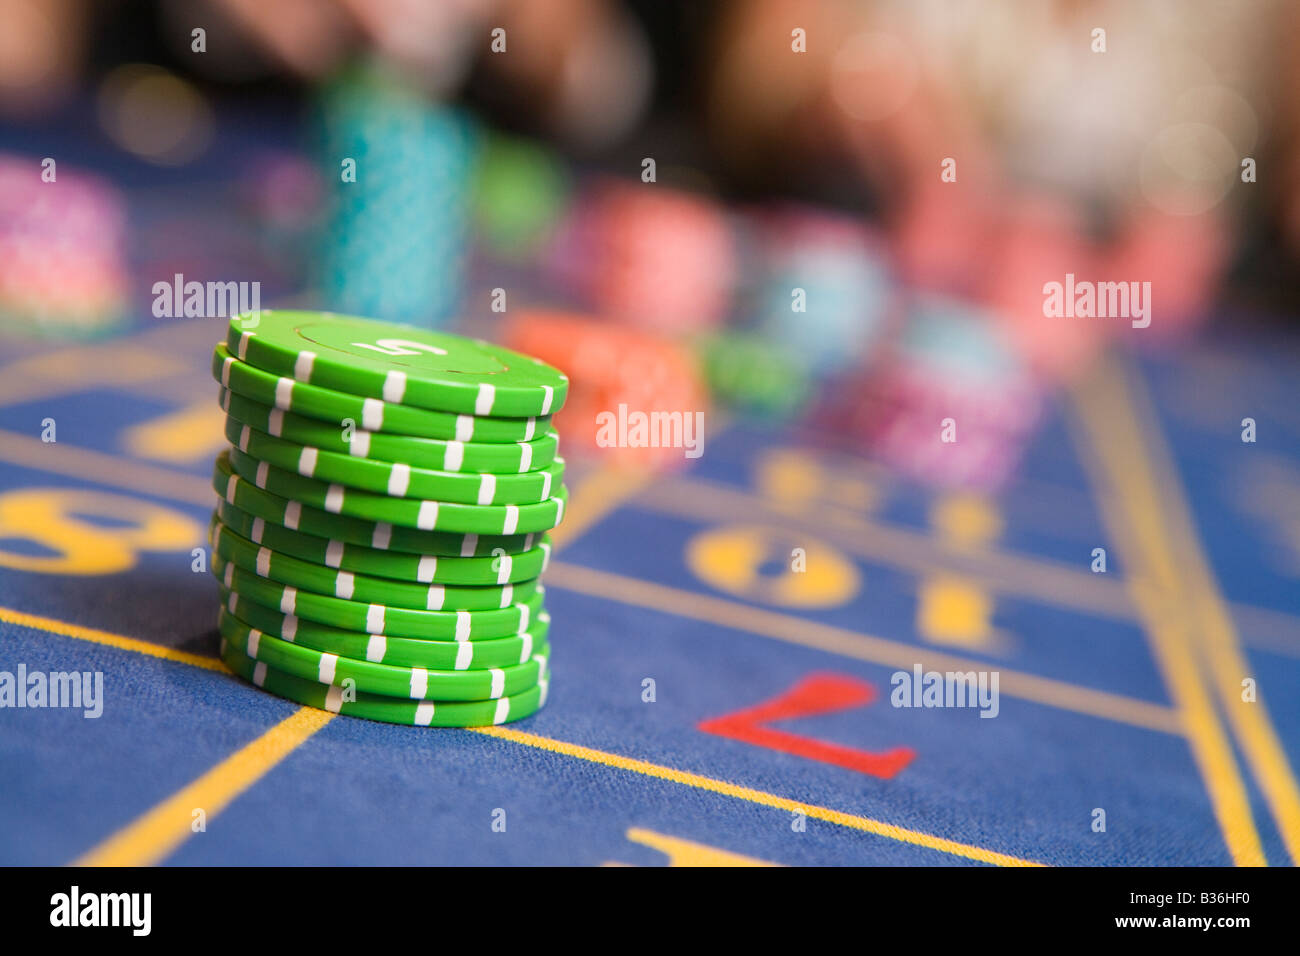 Roulette table with chips on it (selective focus) Stock Photo